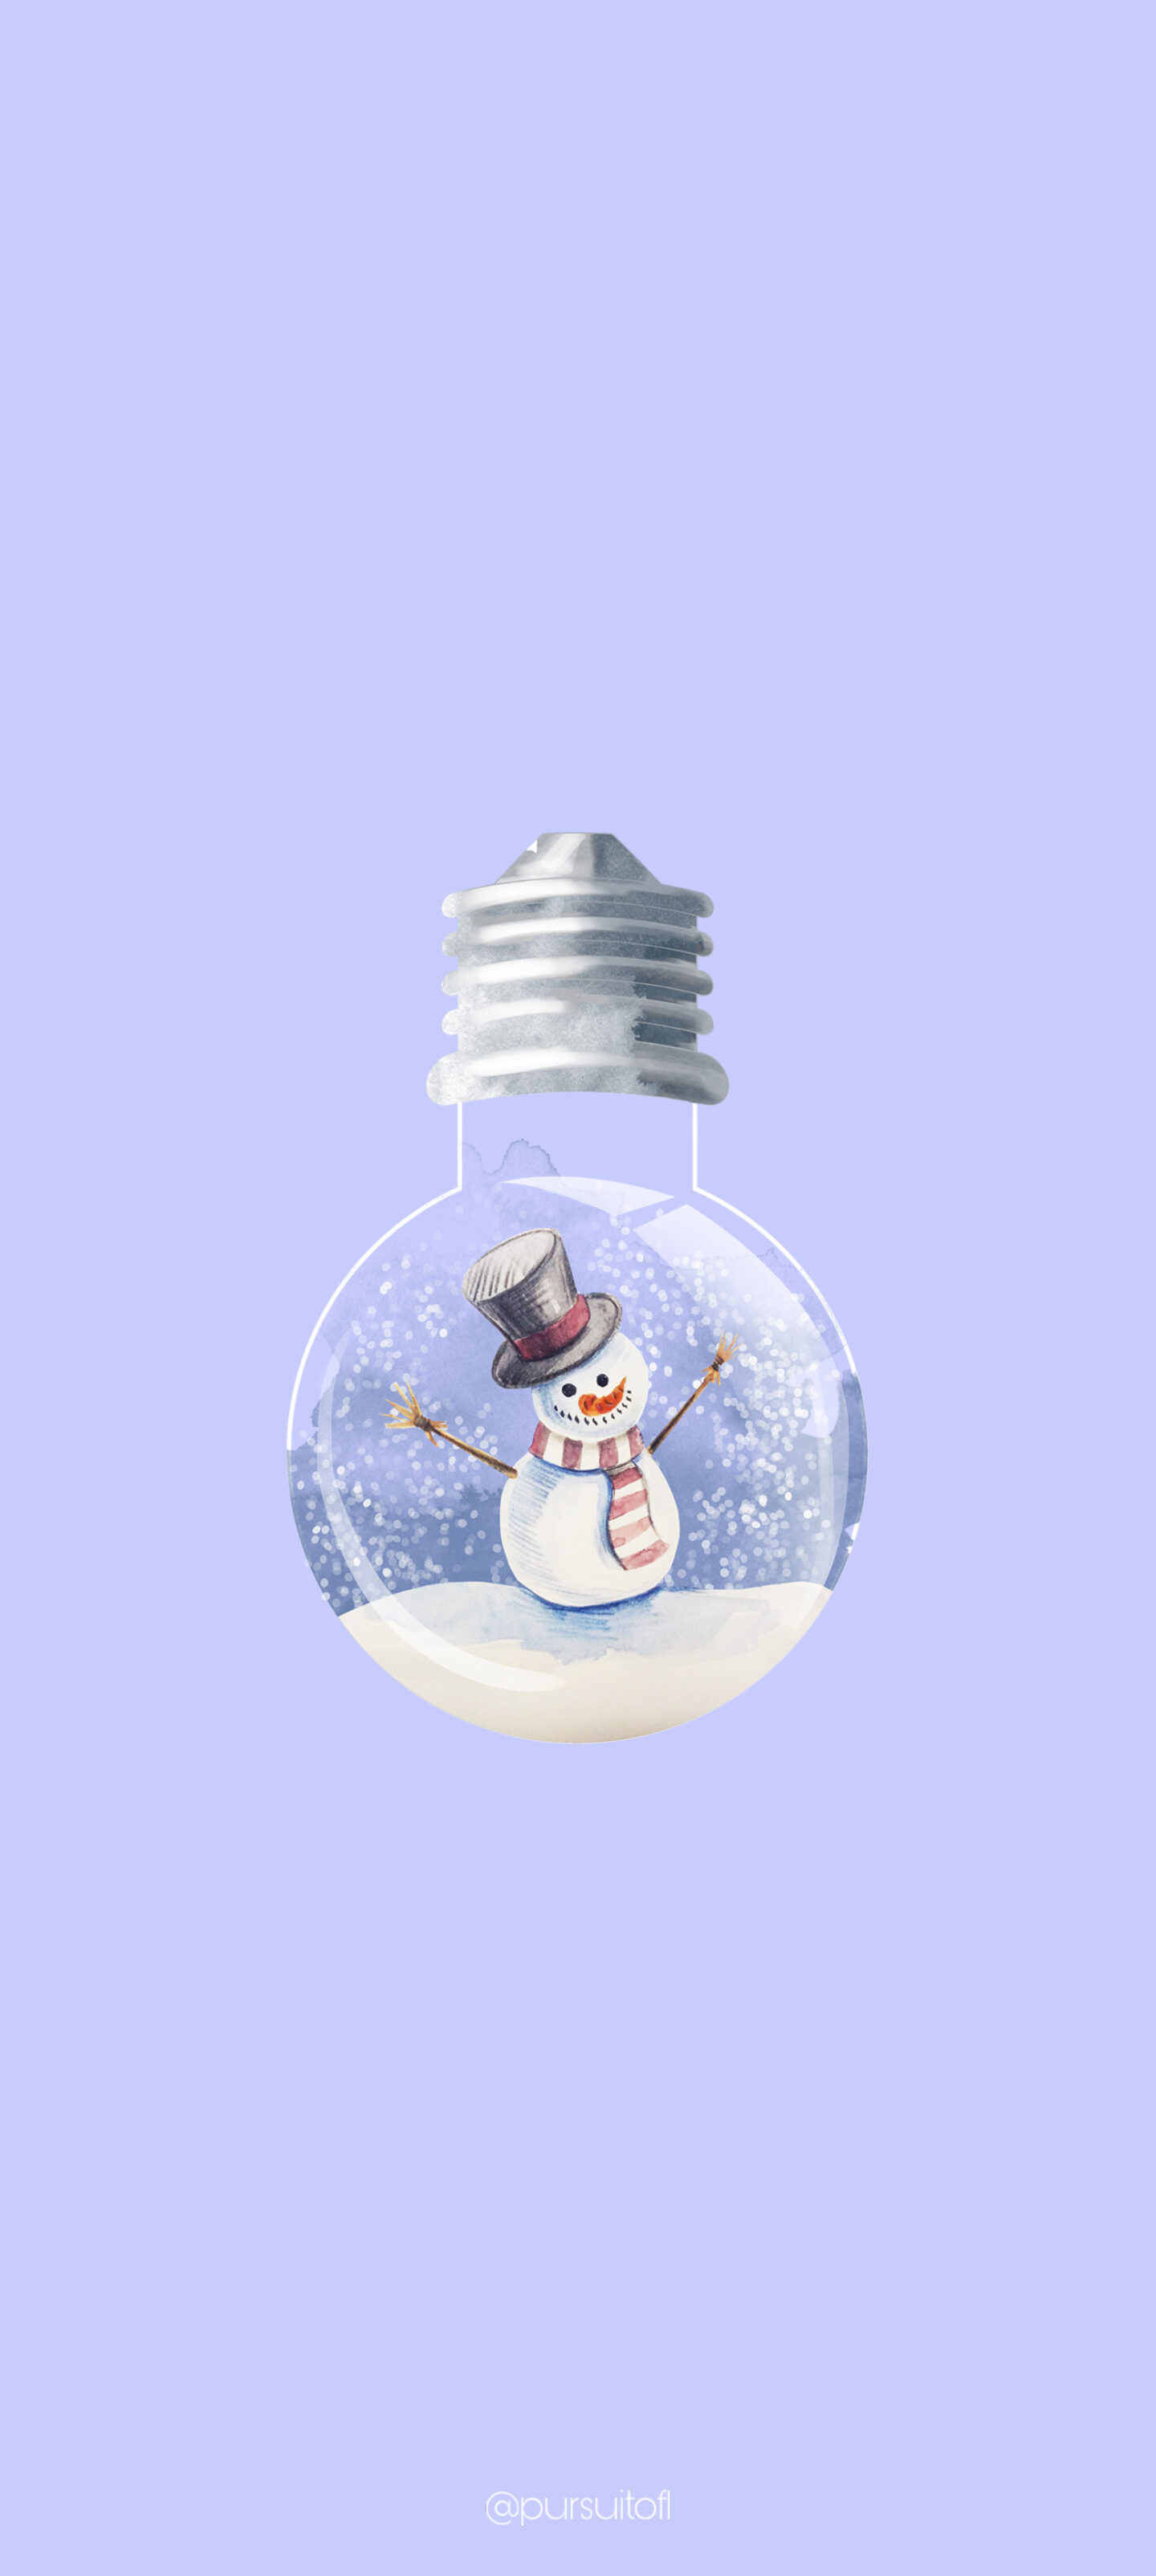 Periwinkle phone wallpaper with snowman and falling snow inside of a lightbulb